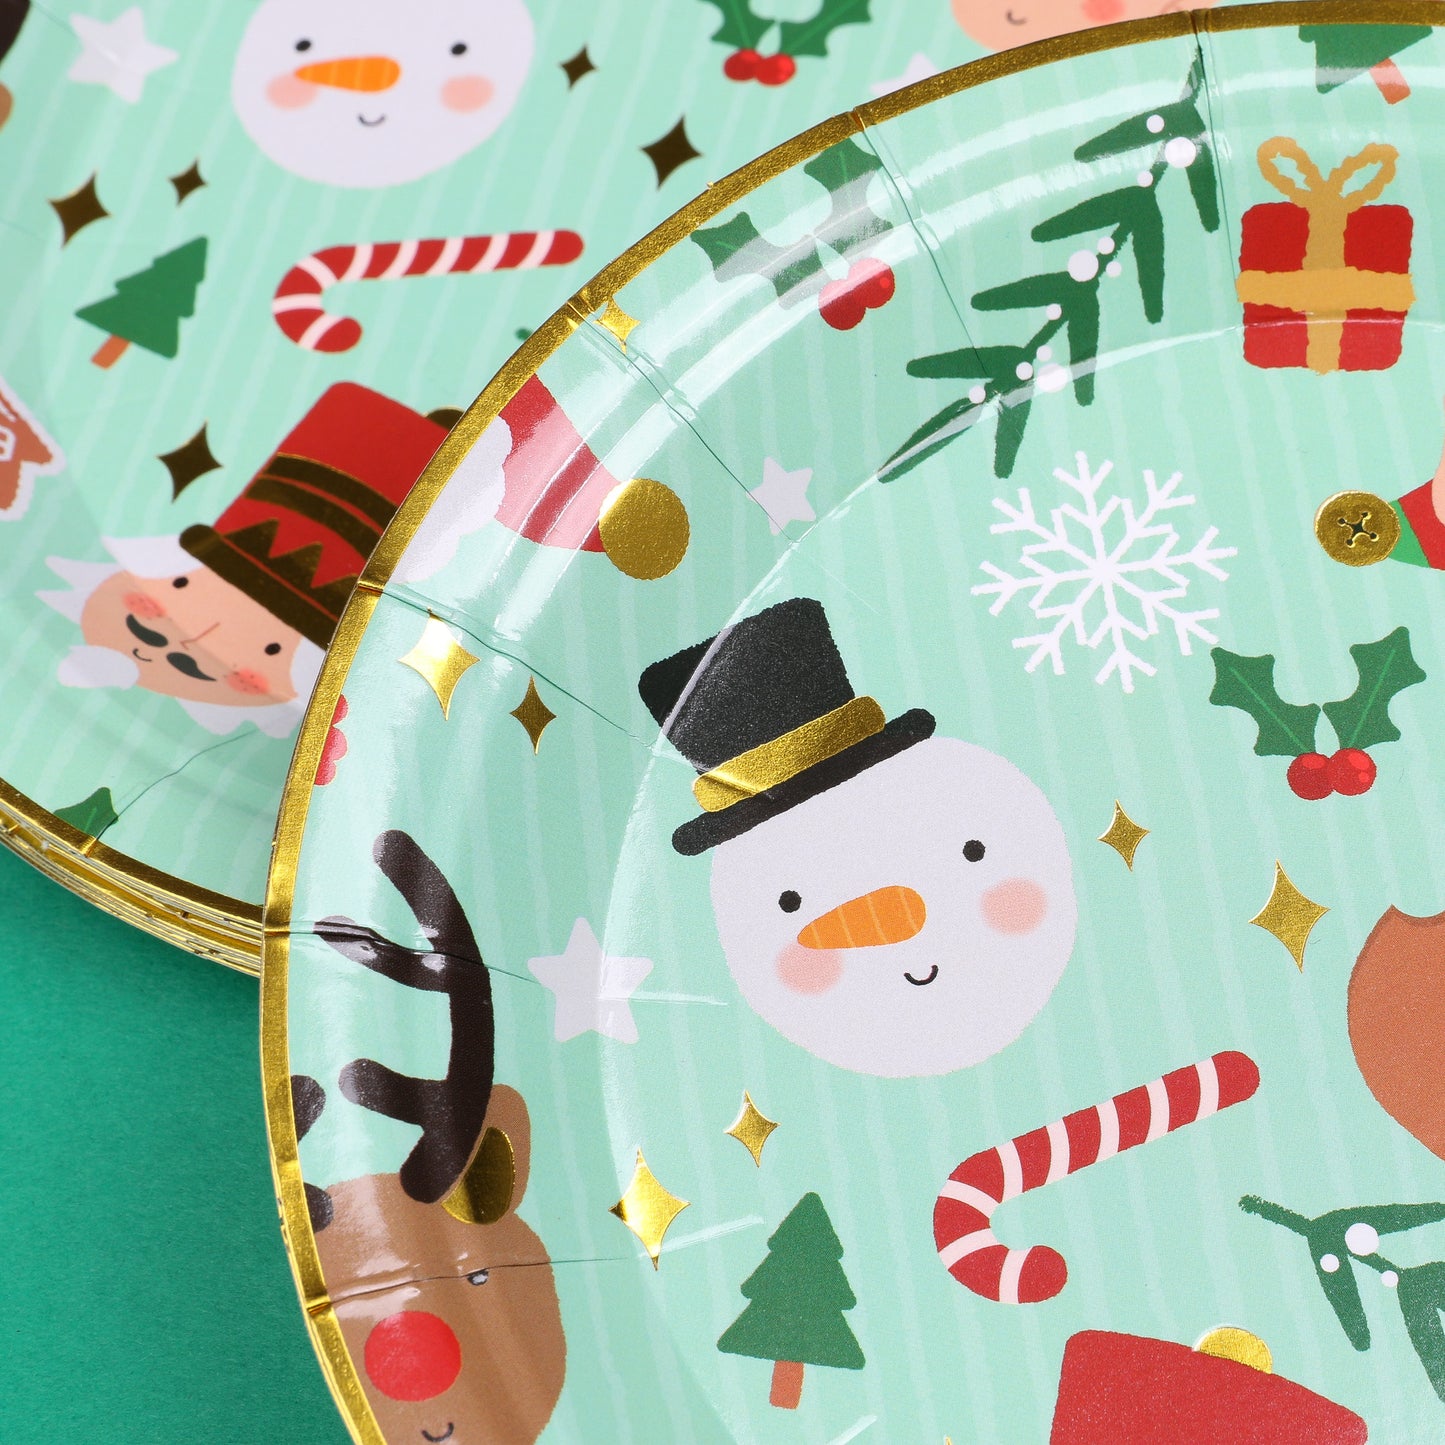 Christmas Design 7 Inch Paper Plates Pack of 10